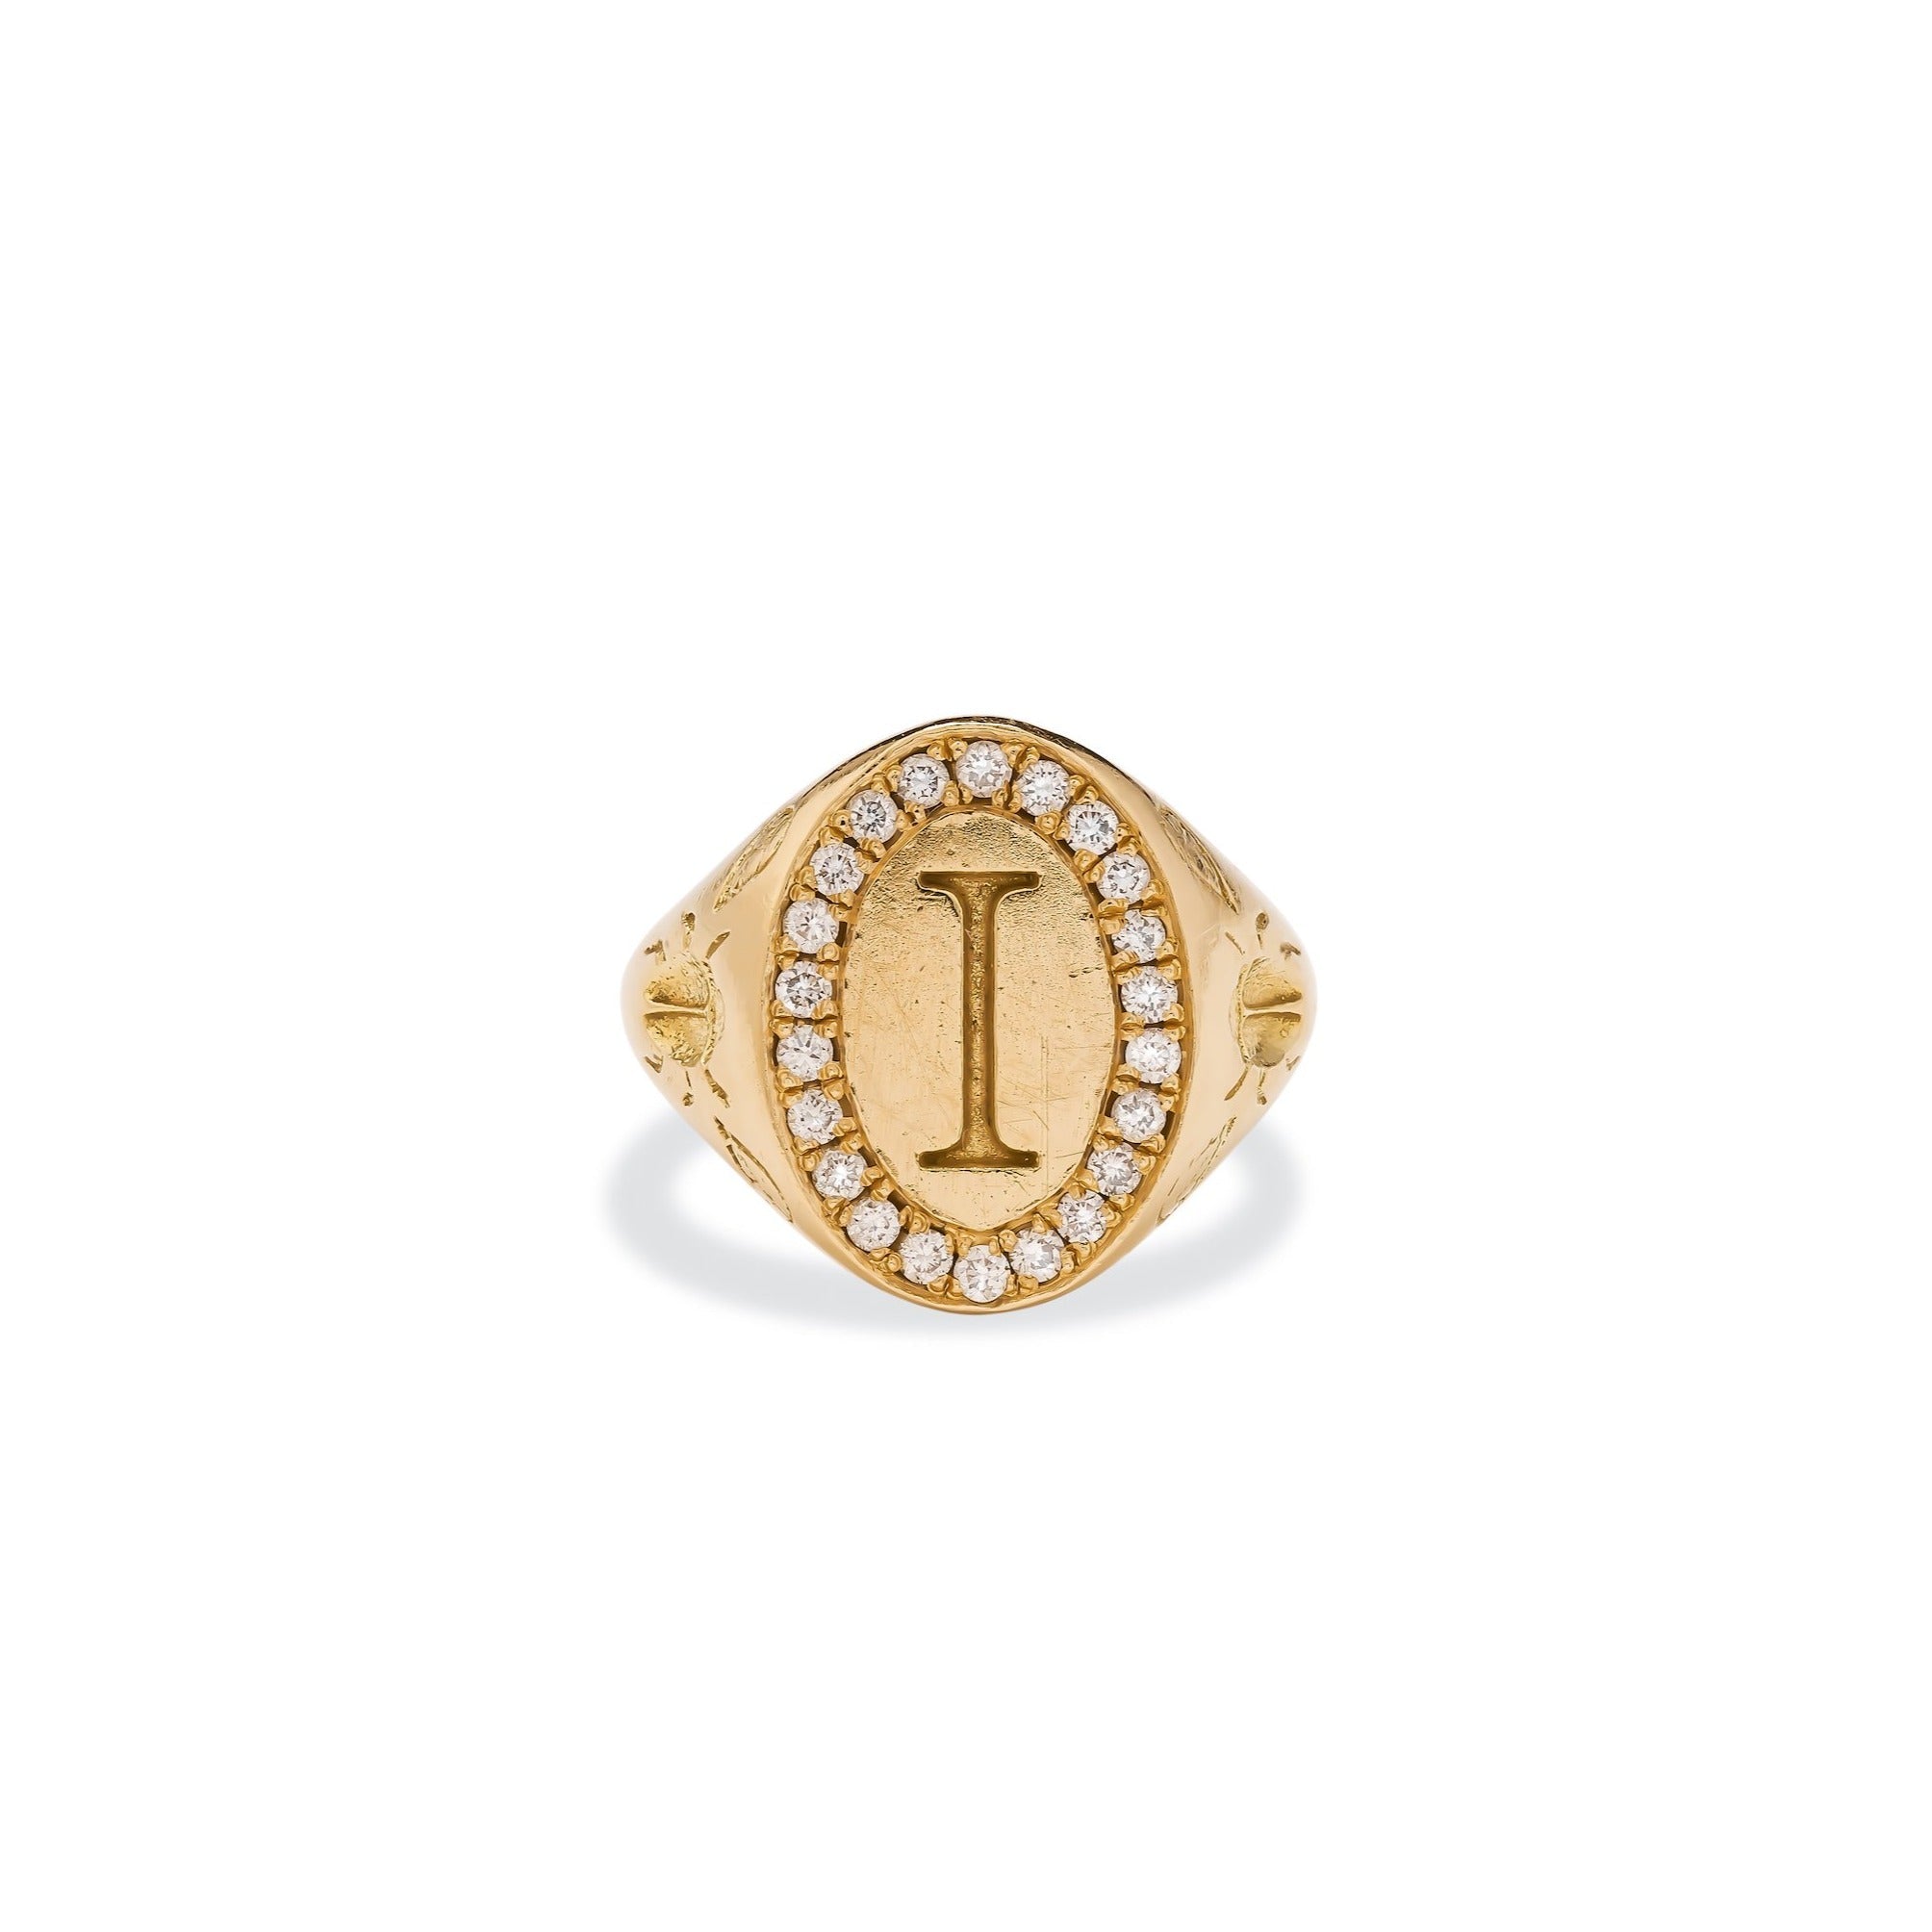 Diamond Initial D Signet Ring in 14k Yellow Gold